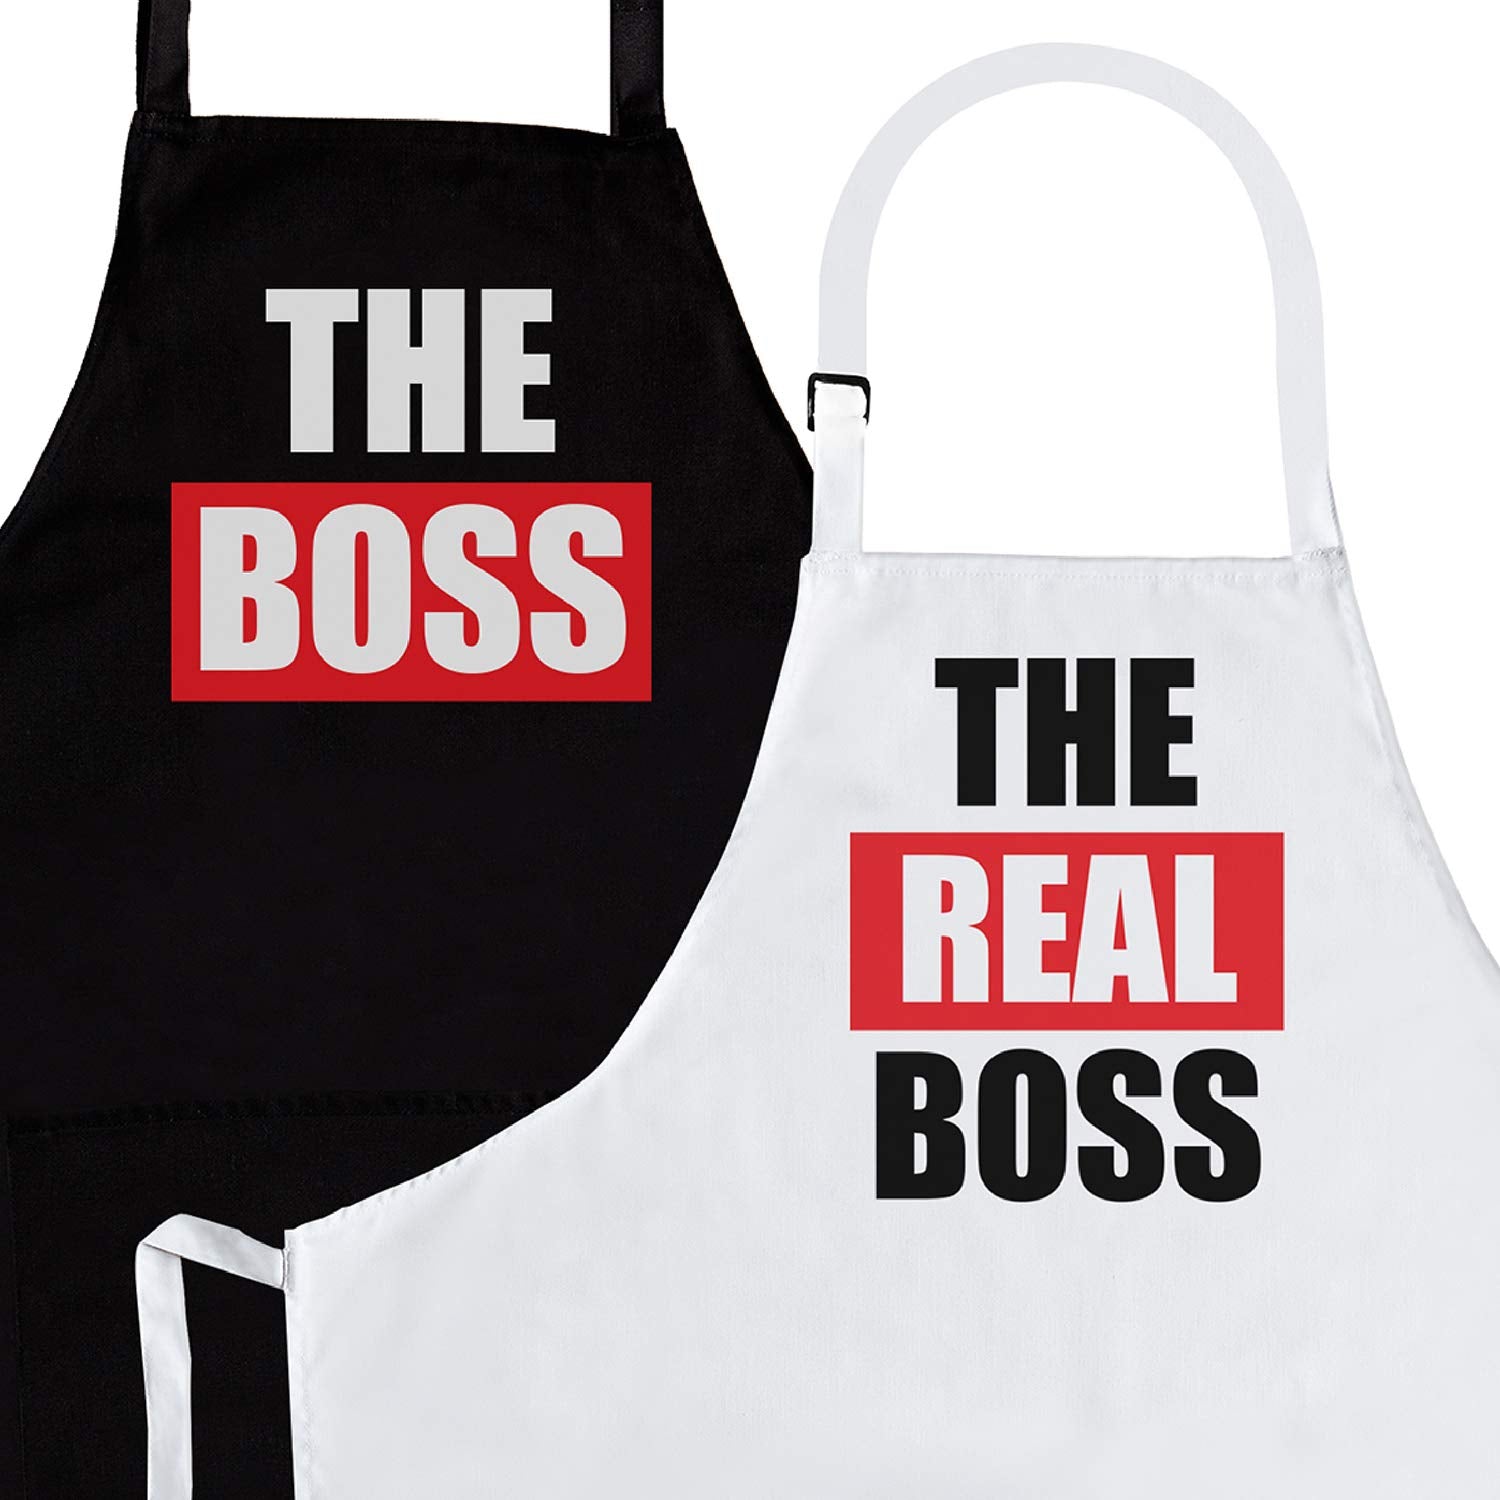 Nomsum Aprons for Couples | The Boss & Real Boss Apron Set | Premium Quality Kitchen Aprons | Perfect for Weddings, Engagements, Anniversaries and Bridal Showers | 2-Piece, One Size Fits All